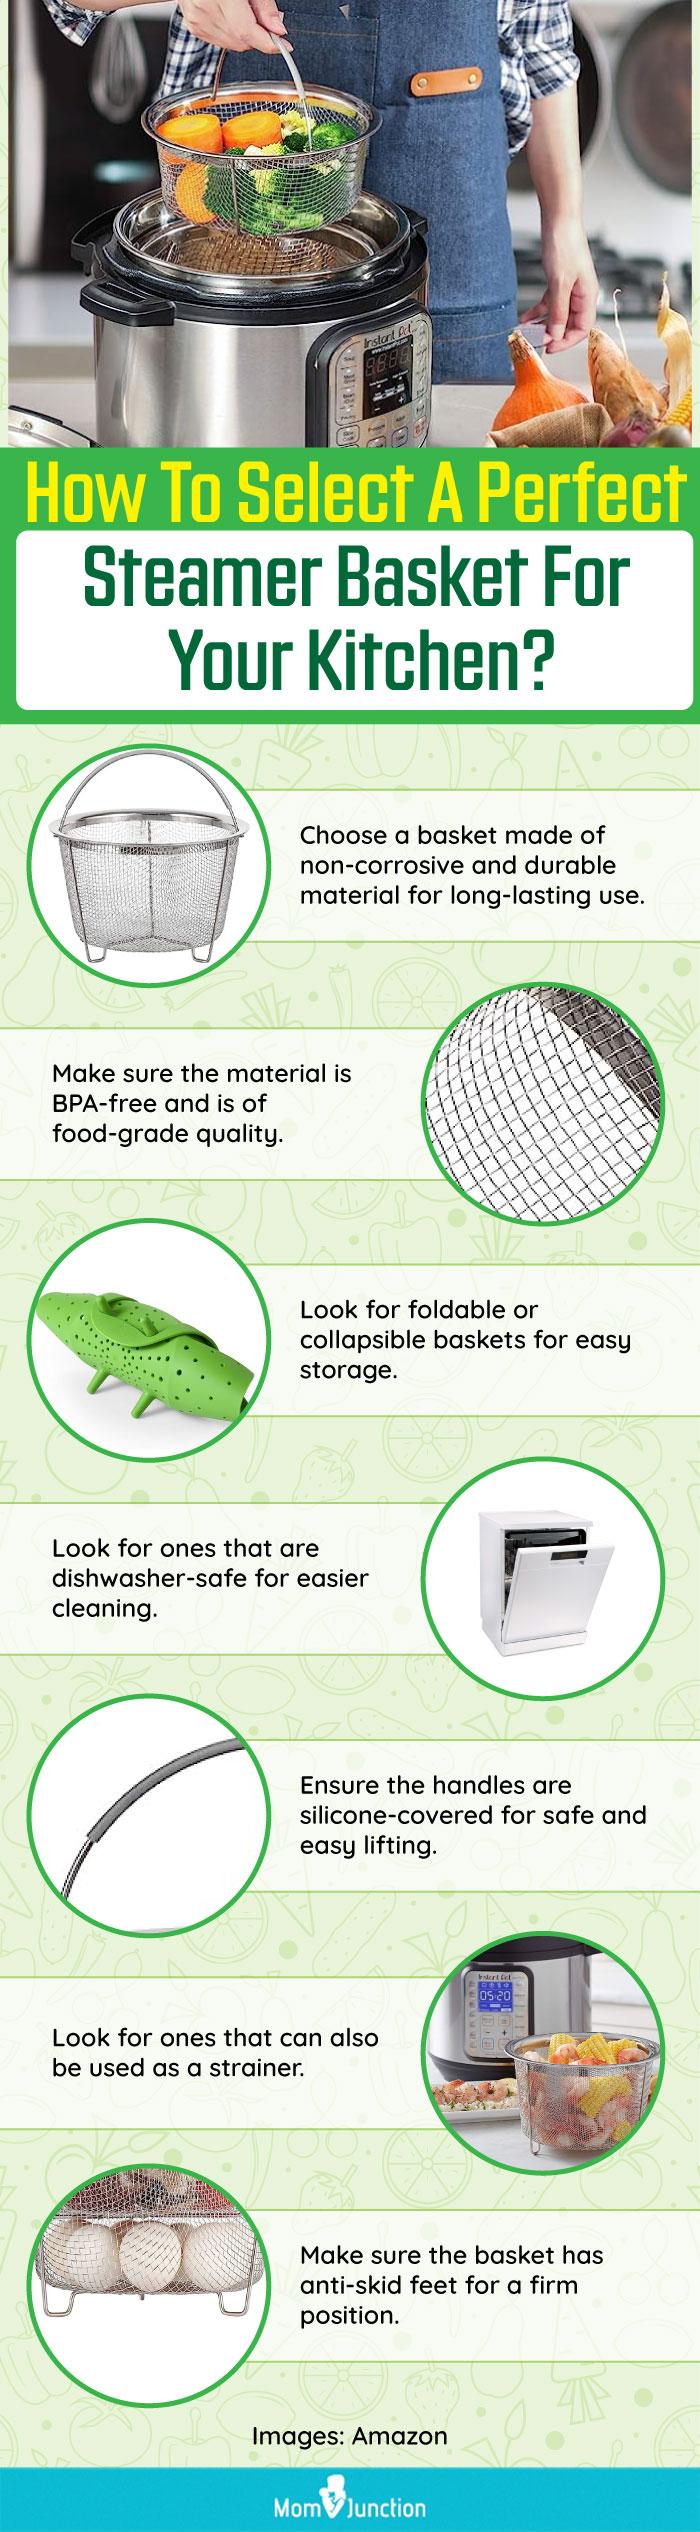 How To Select A Perfect Steamer Basket For Your Kitchen (infographic)